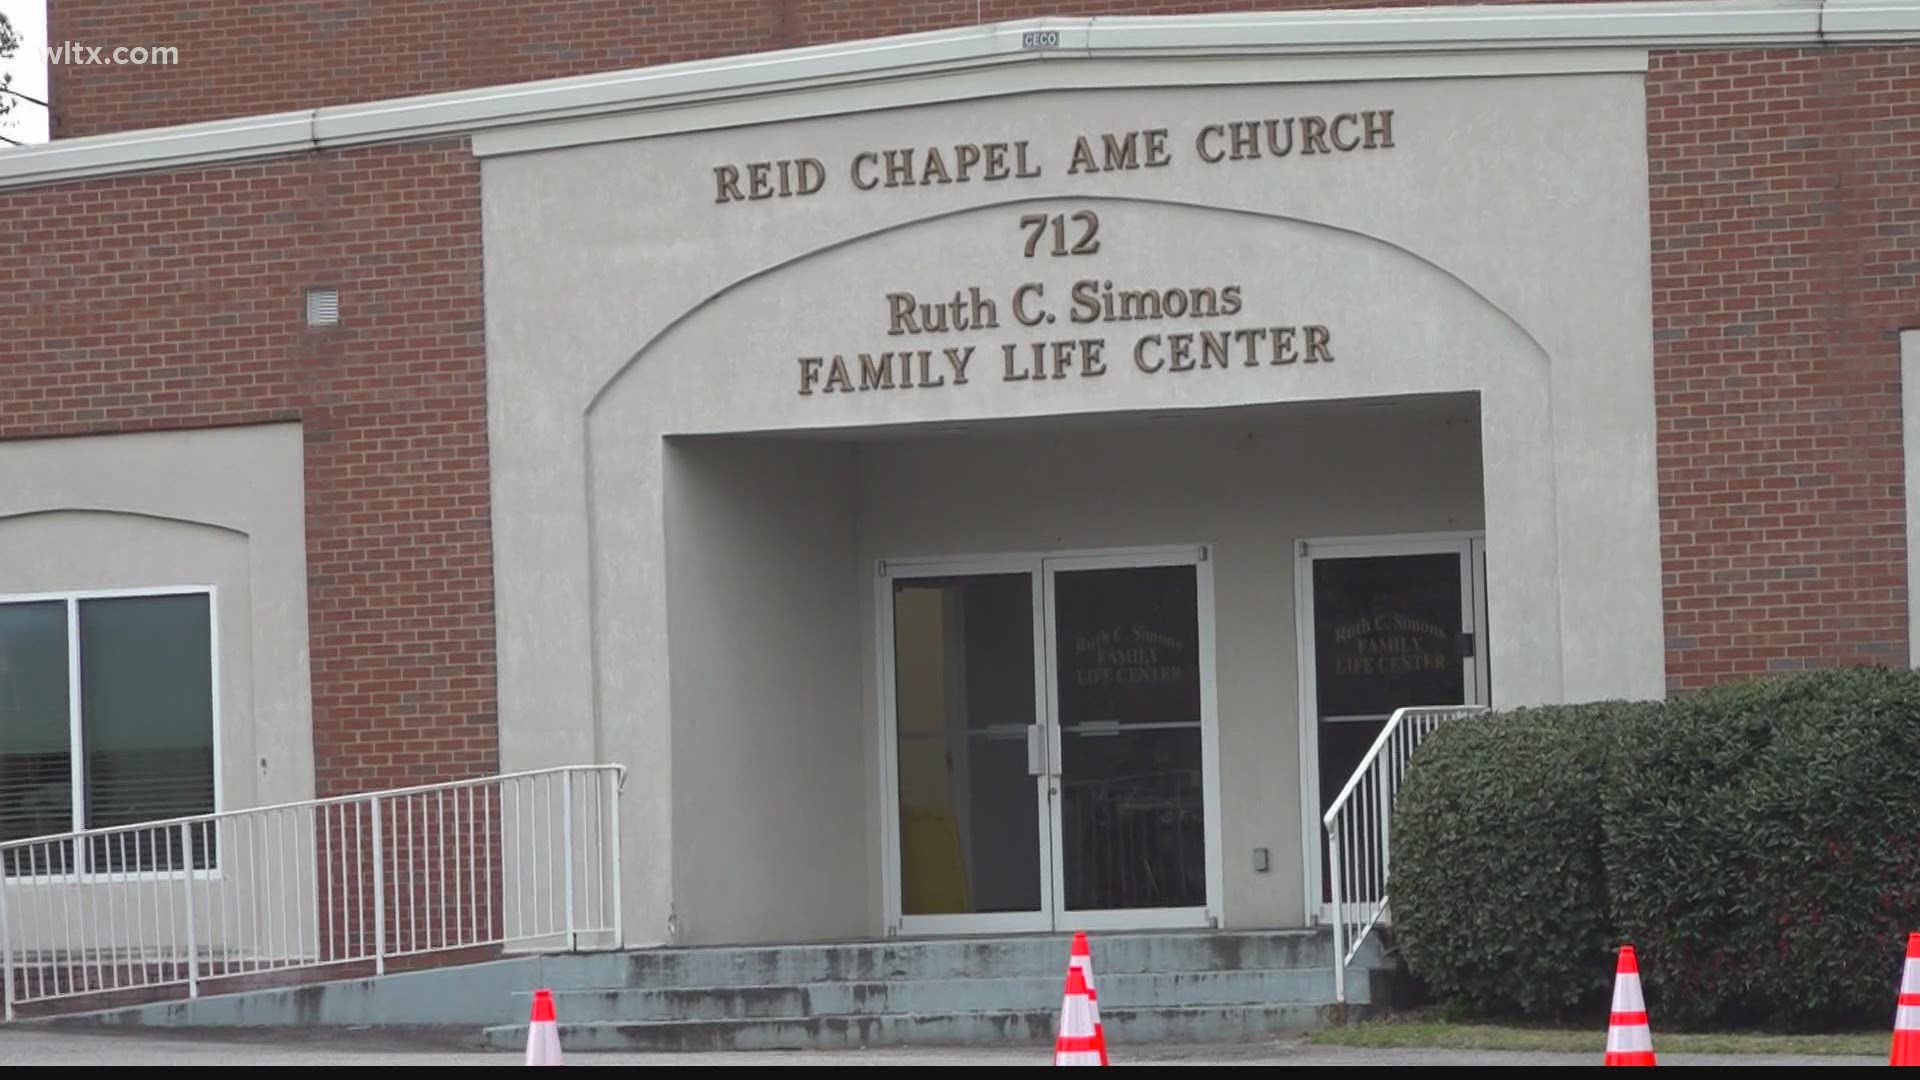 The Reid Chapel AME Church is hosting a drive thru event on Saturday to encourage people to get tested and sign up for the COVID-19 vaccine.